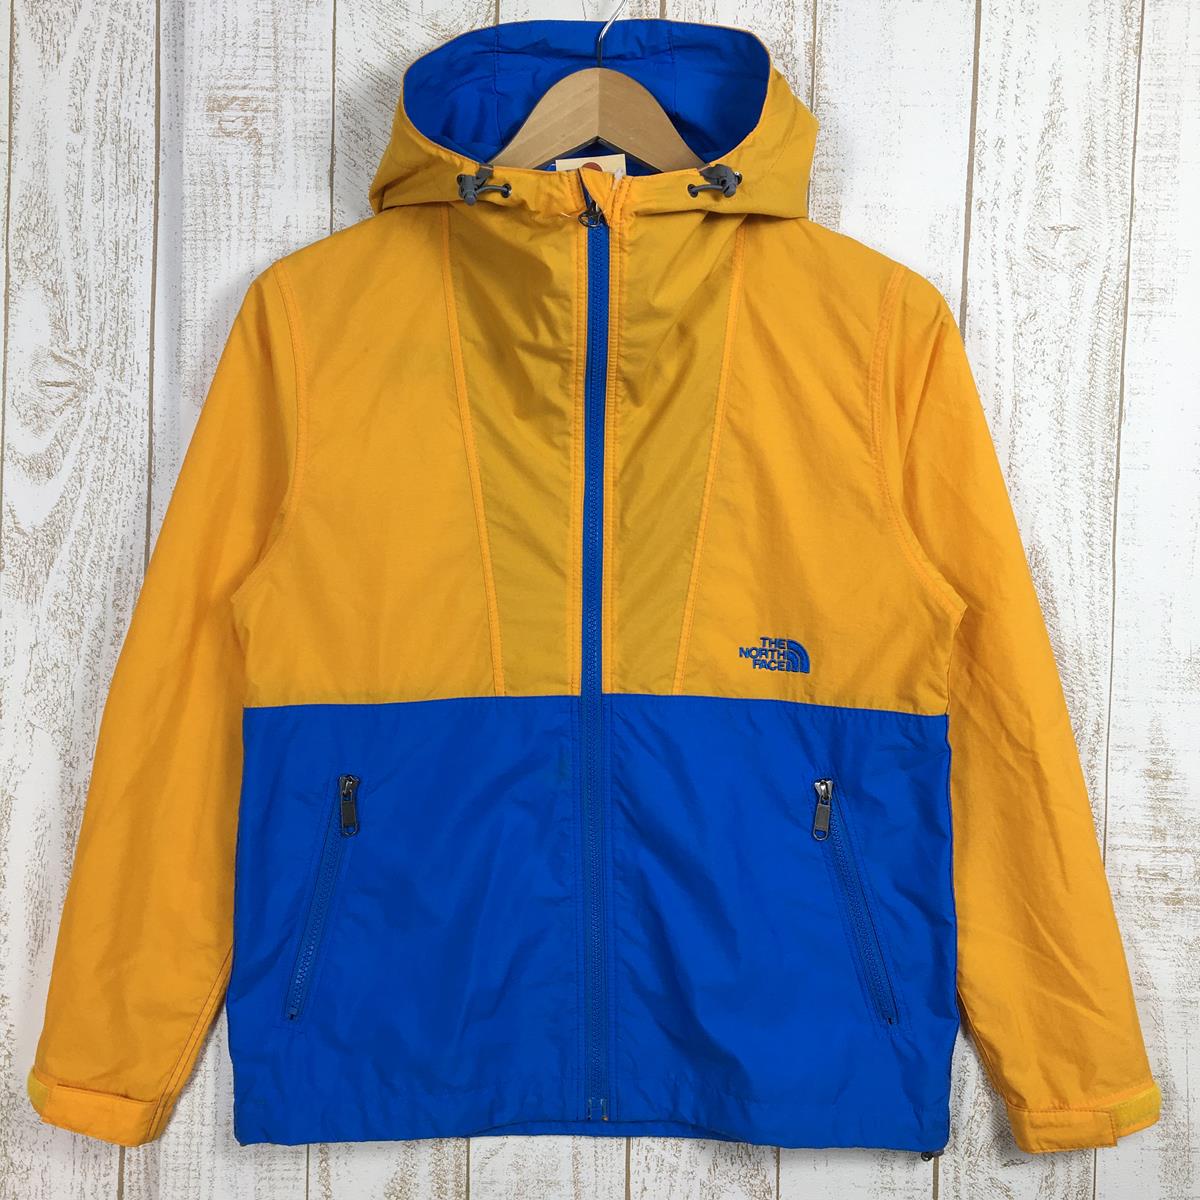 [WOMEN's S] The North Face Compact Jacket Windshell Hoodie NORTH FACE  NPW11920 RY Royal Blue / Yellow Gold Orange